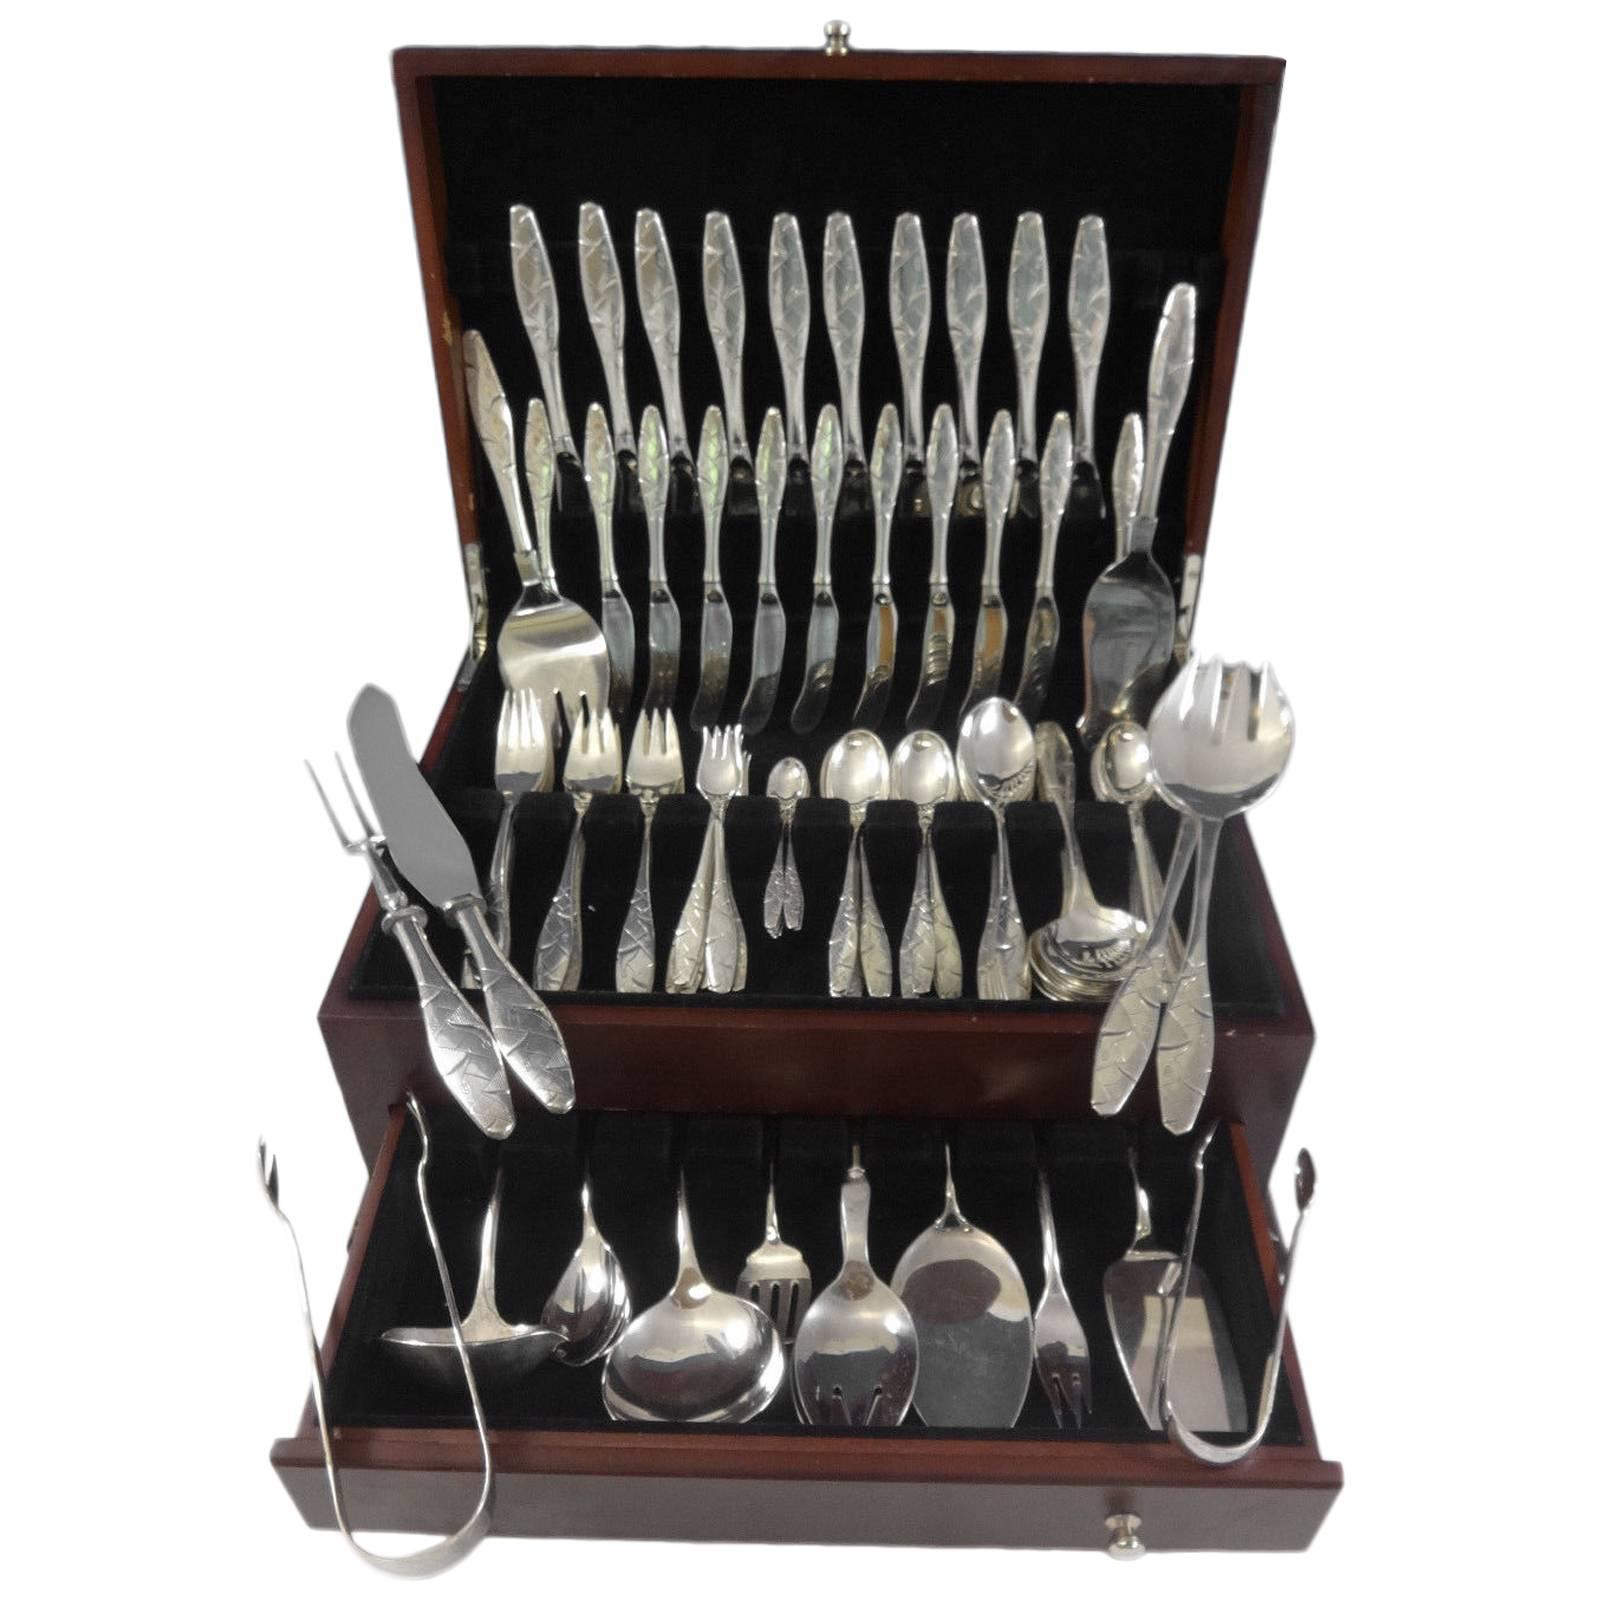 Diamant Aka Diamond by A. Dragsted Danish Sterling Silver Flatware Set 118 Pcs